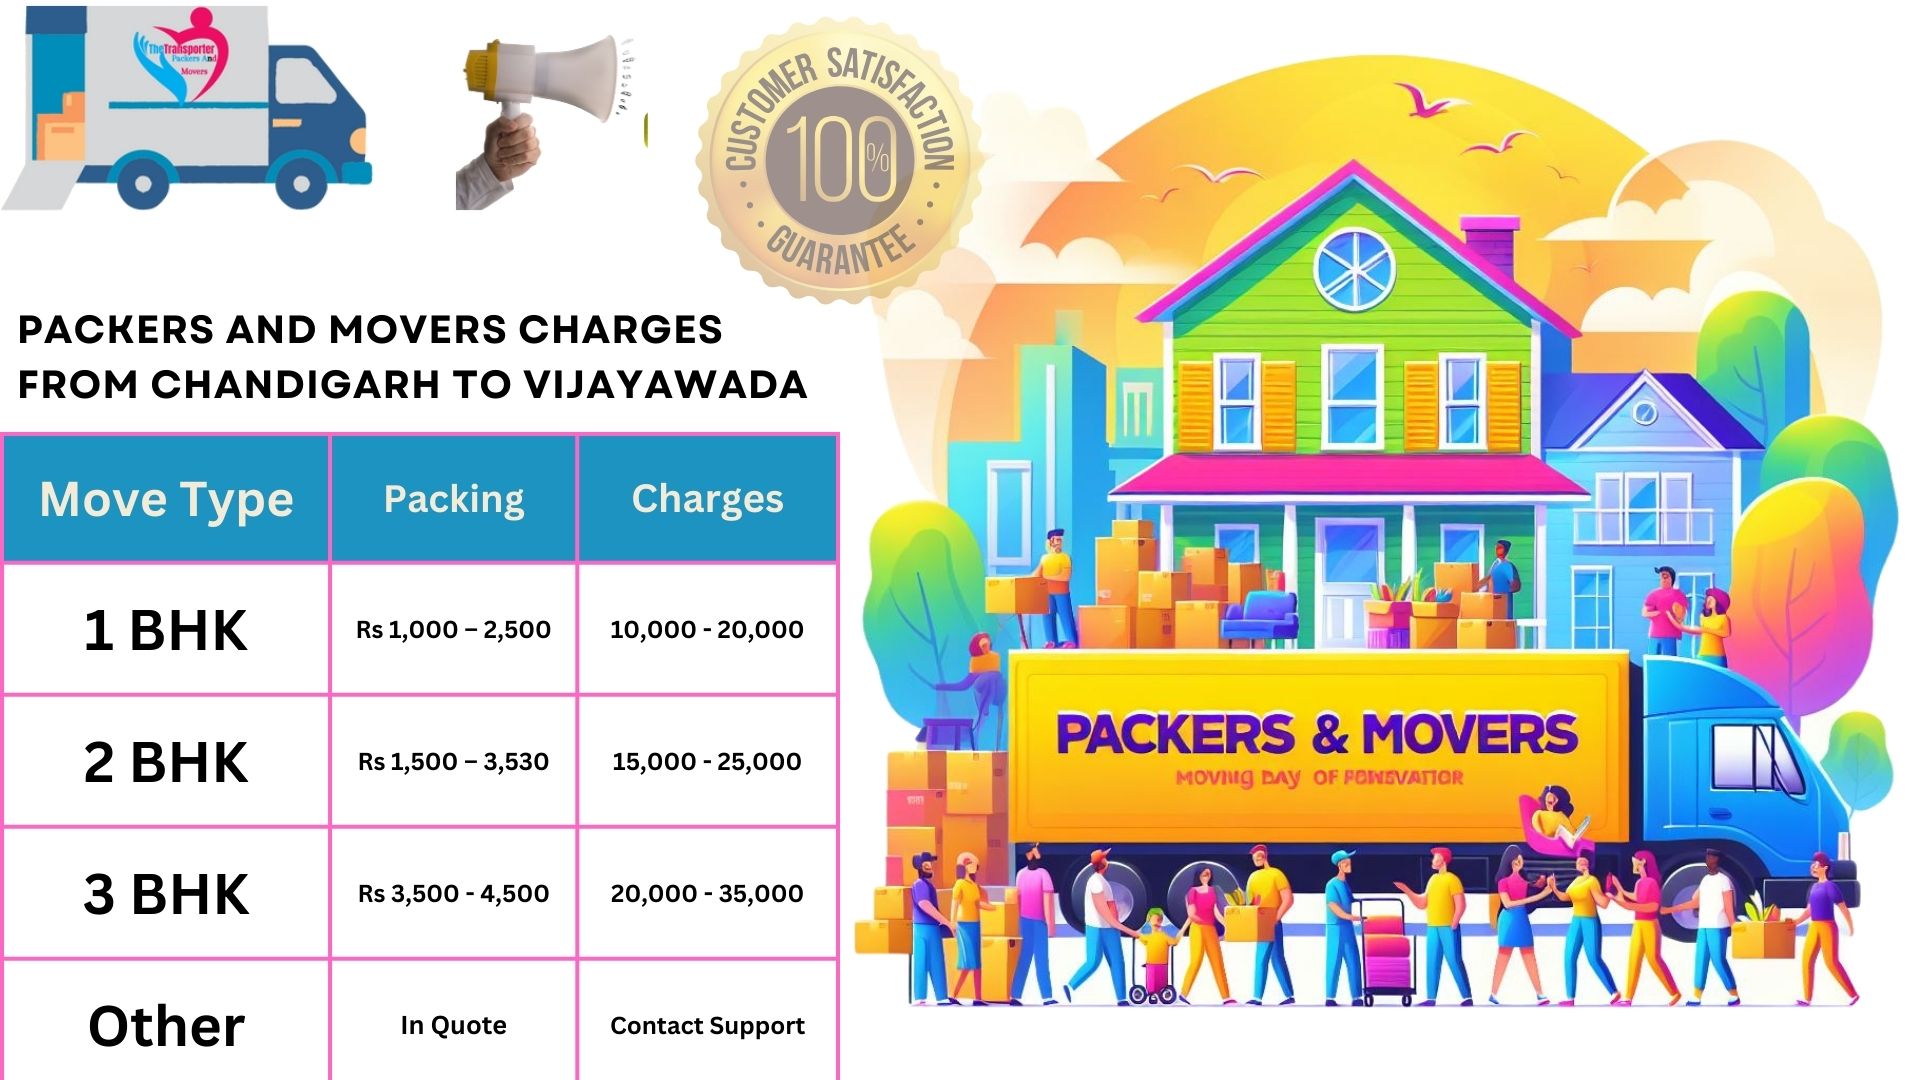 Packers and Movers charges list From Chandigarh to Vijayawada